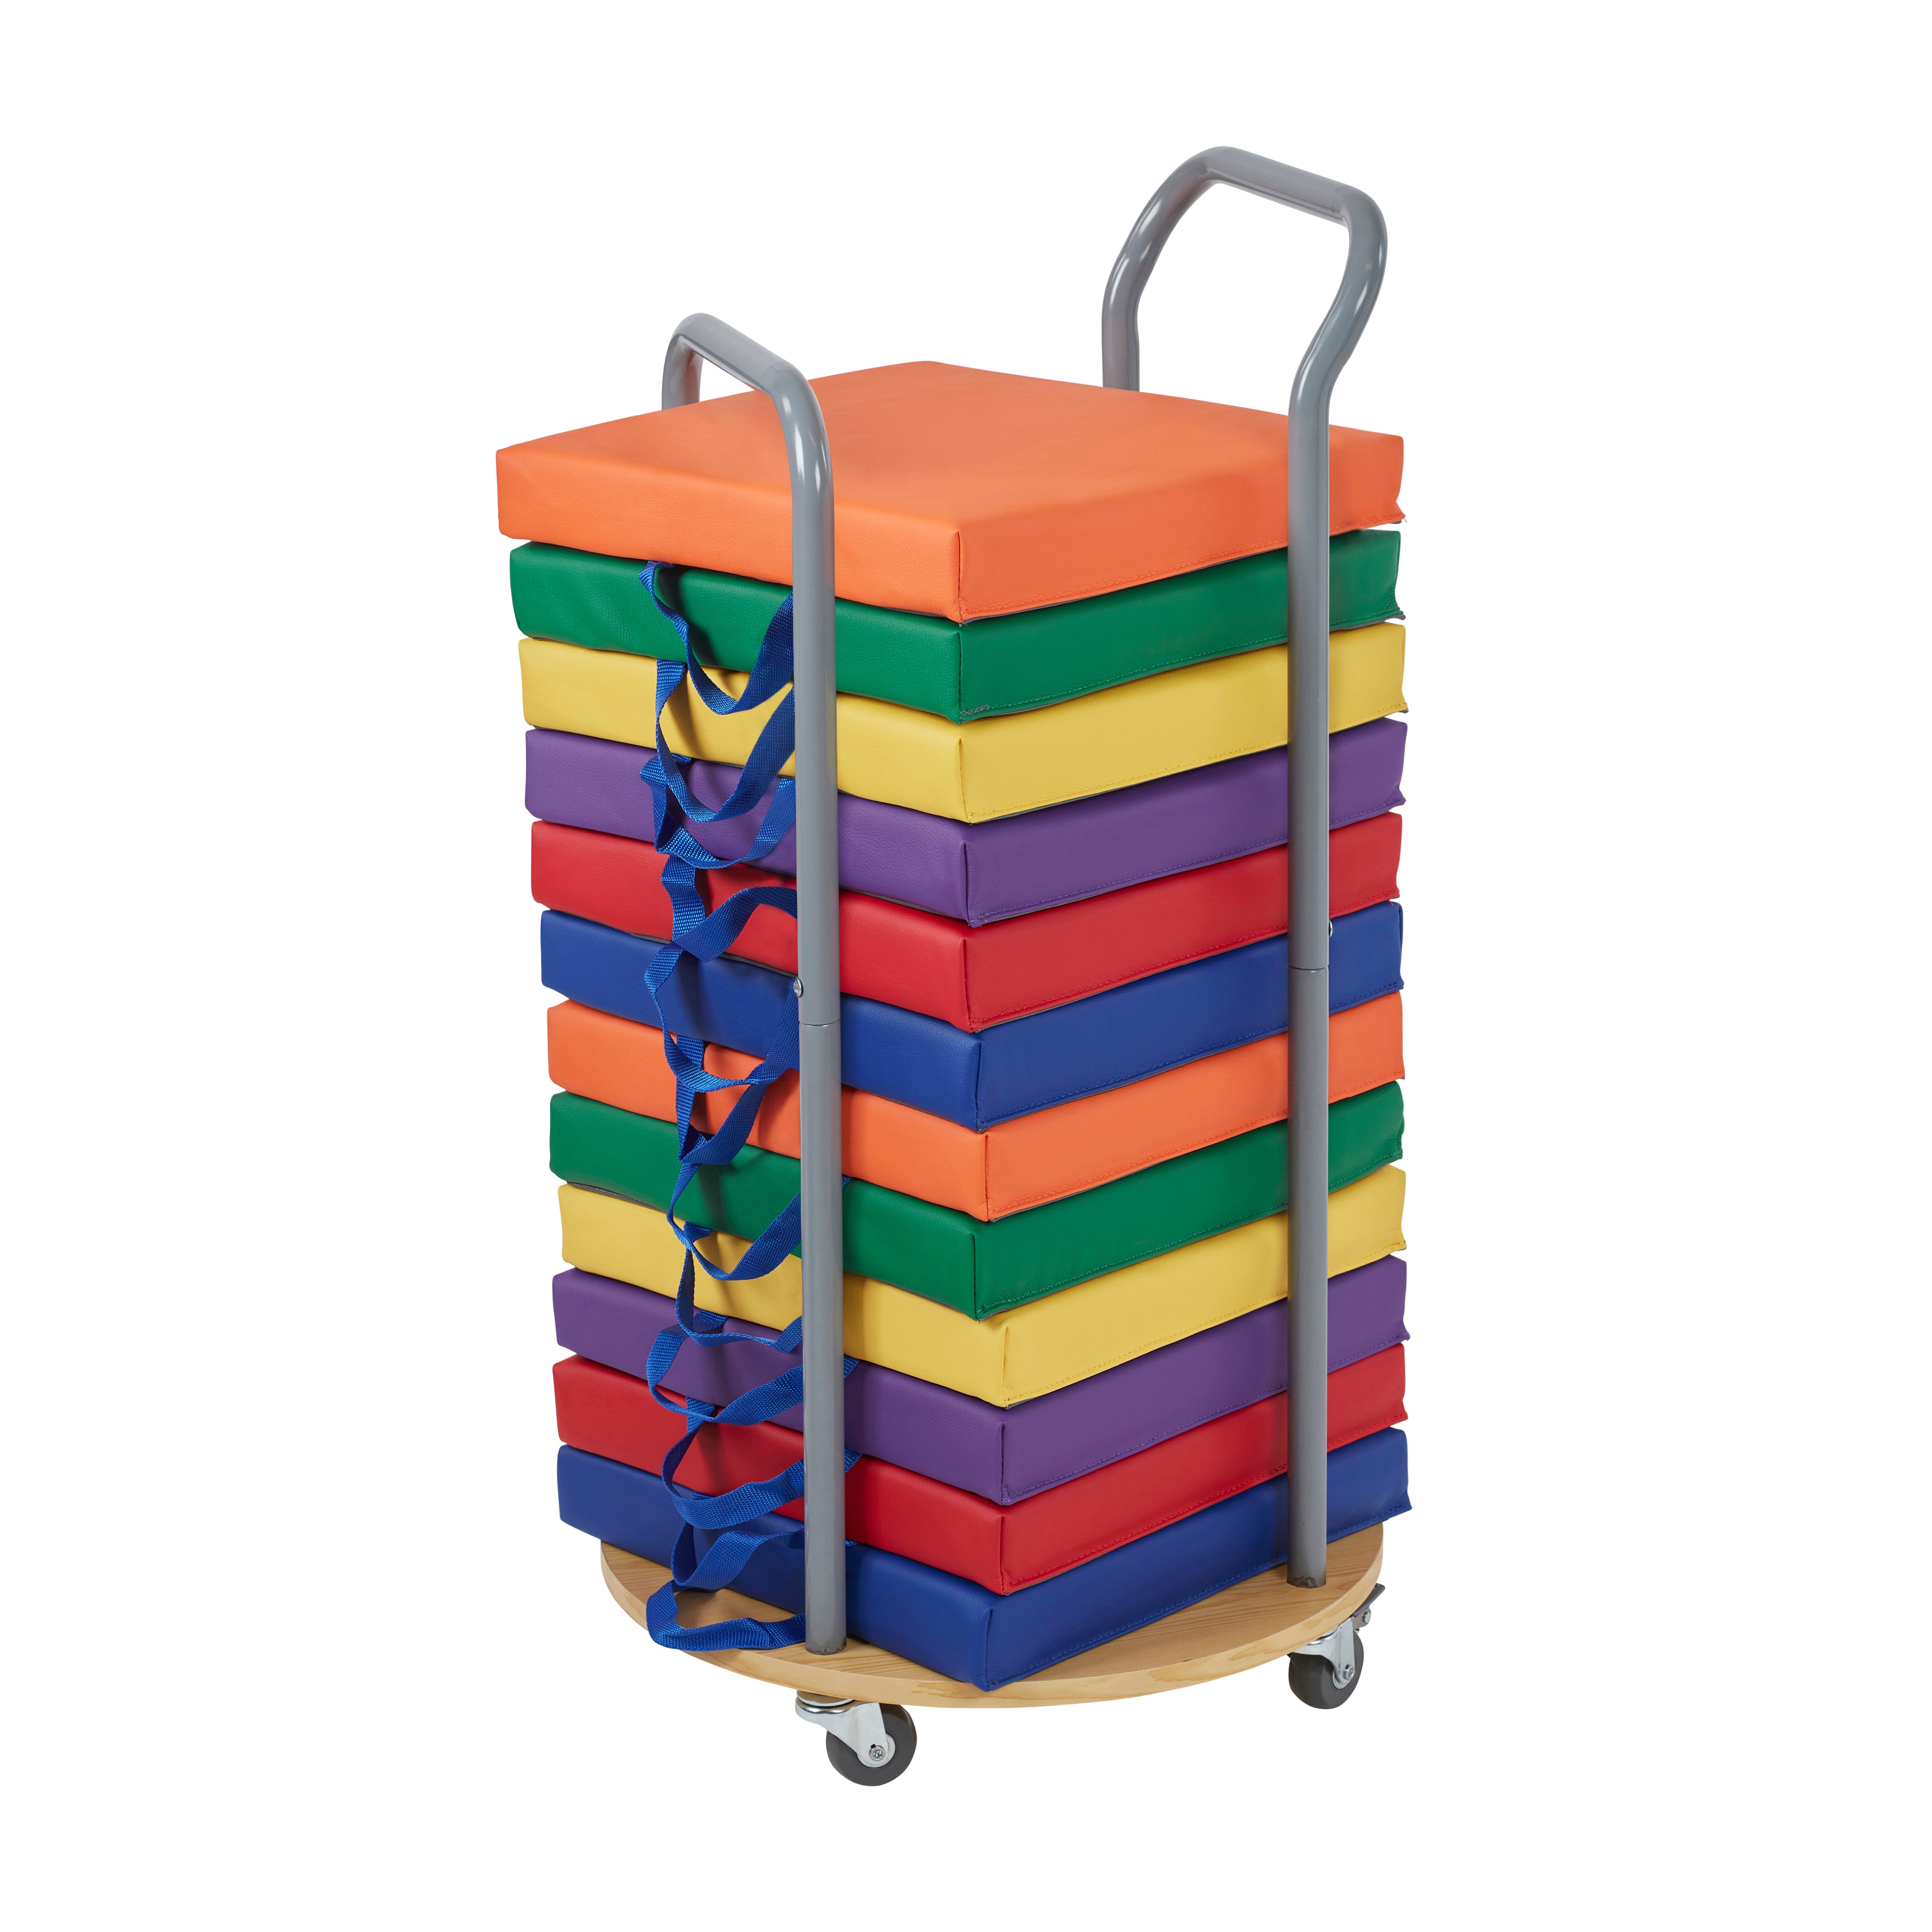 Mobile Cushion Cart and SoftZone Square Floor Cushions, Flexible Seating